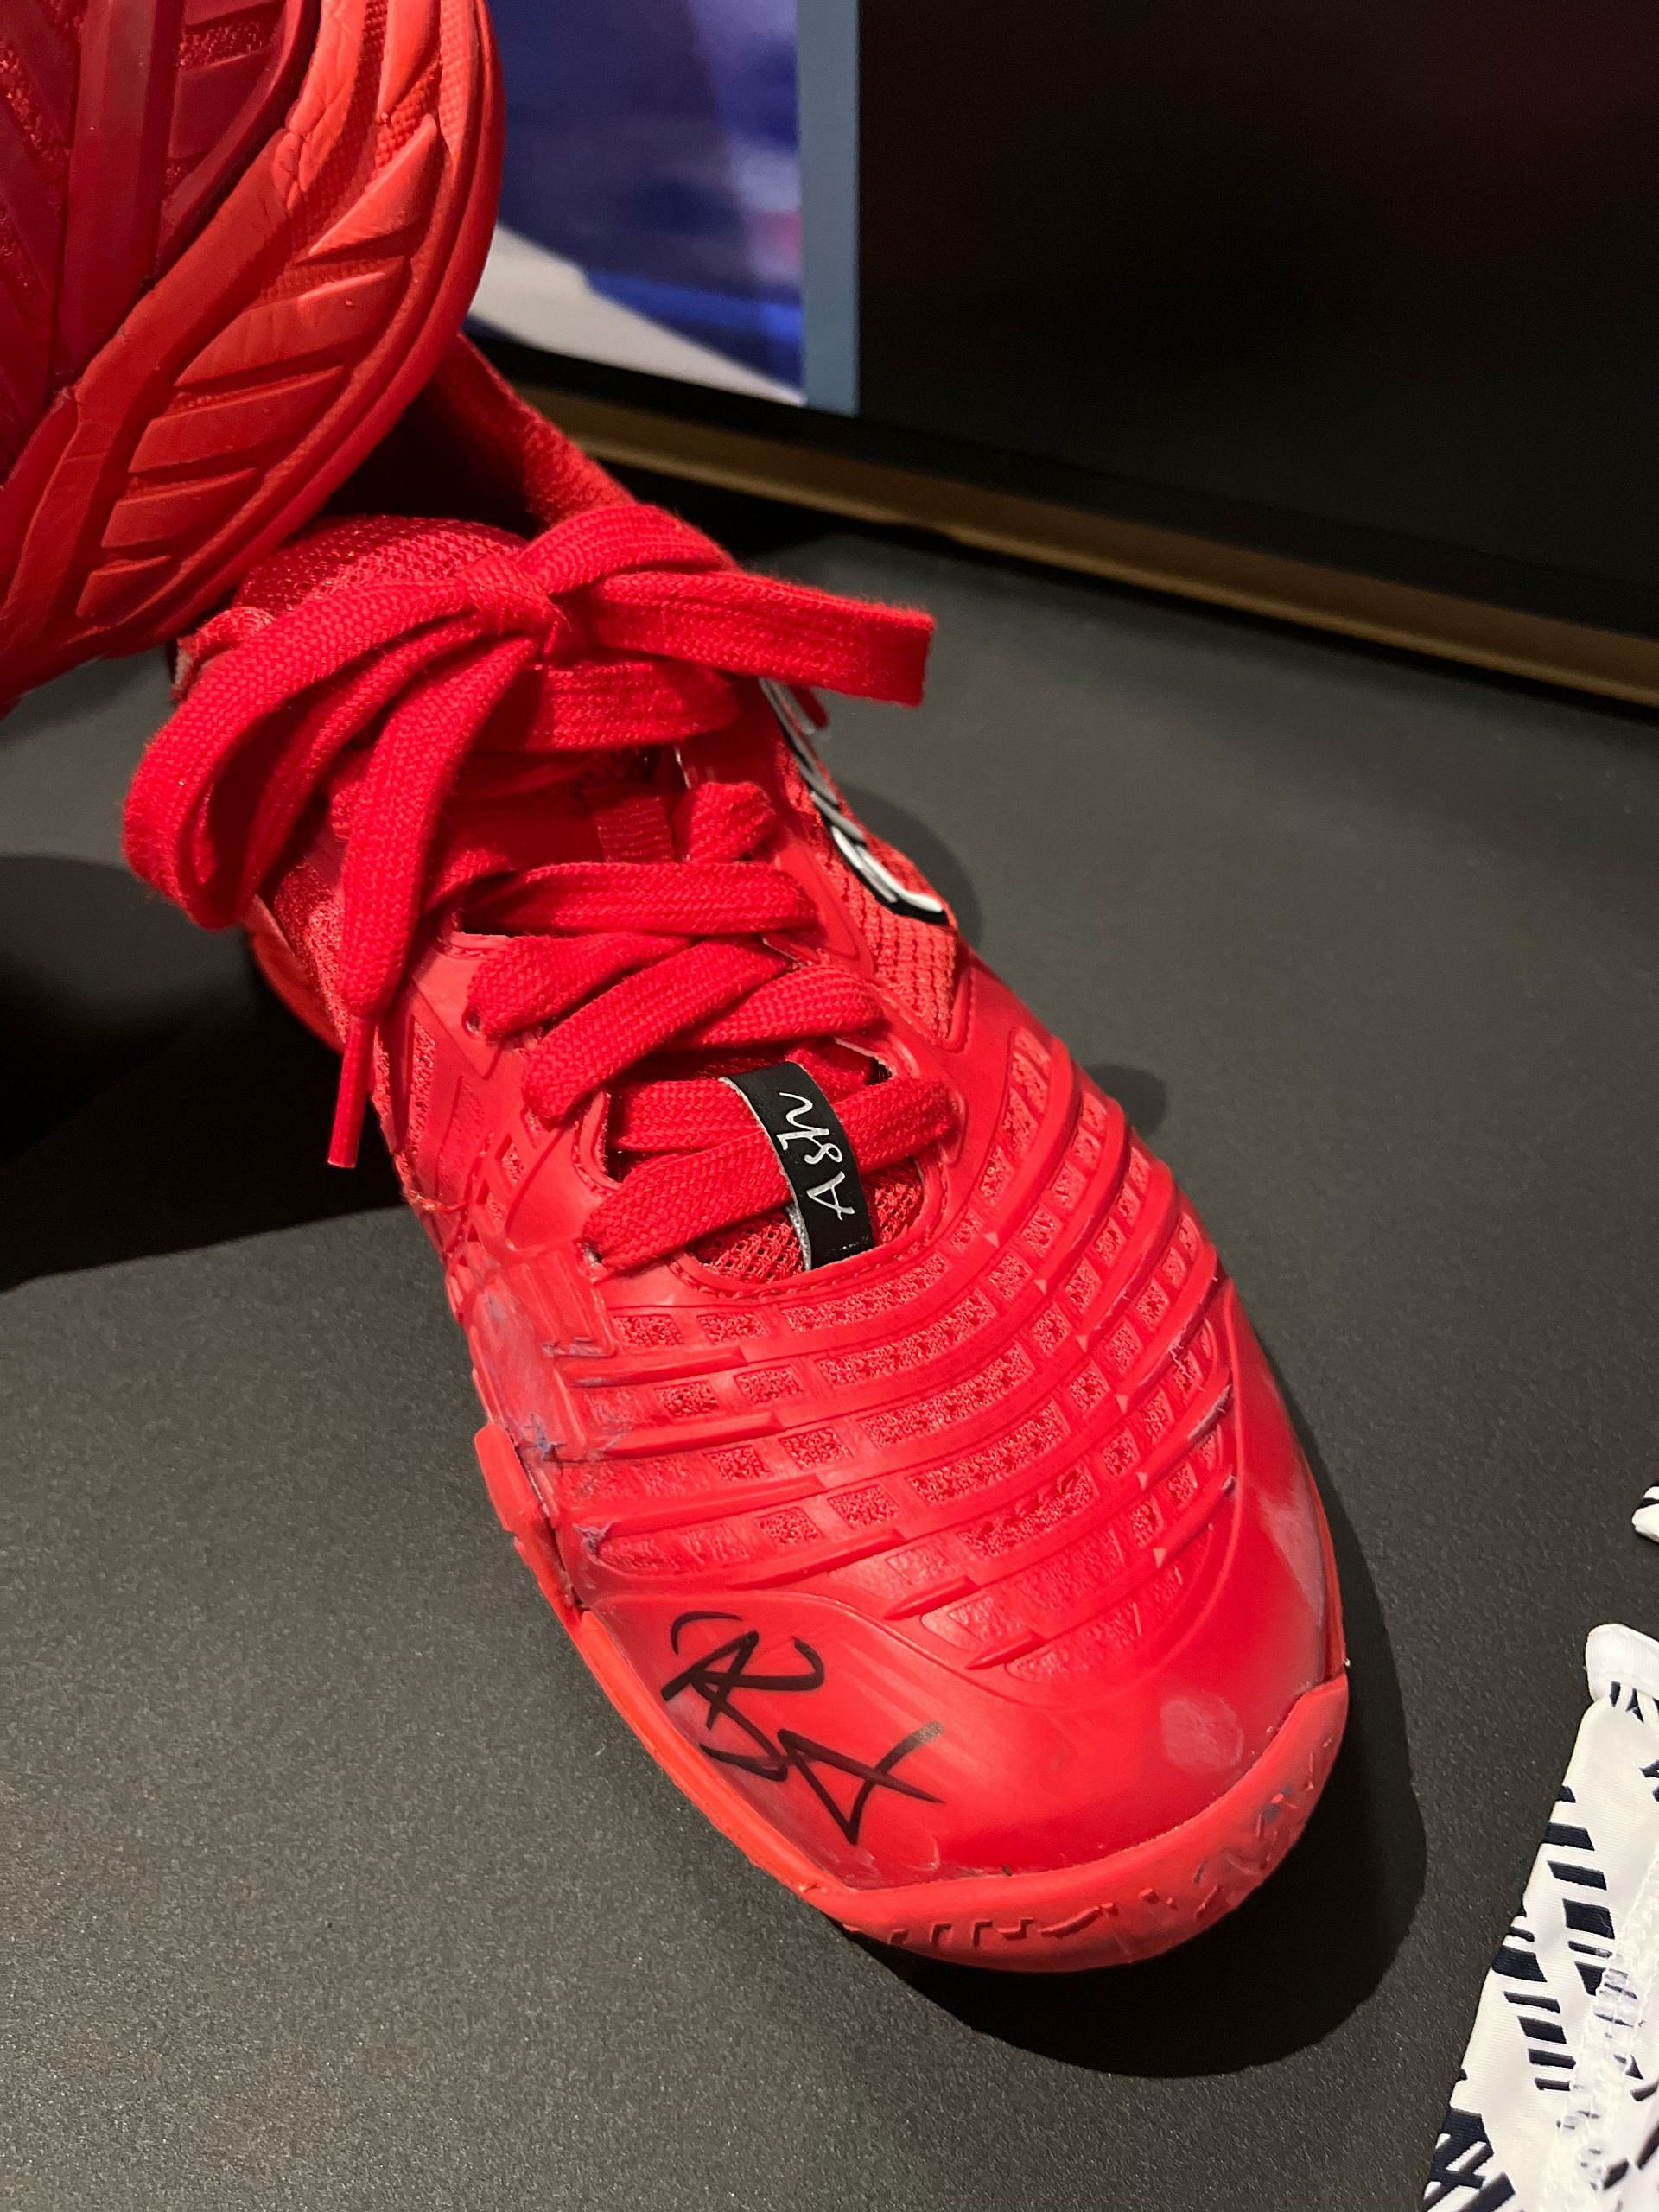 Ashleigh Barty&#039;s autographed shoes